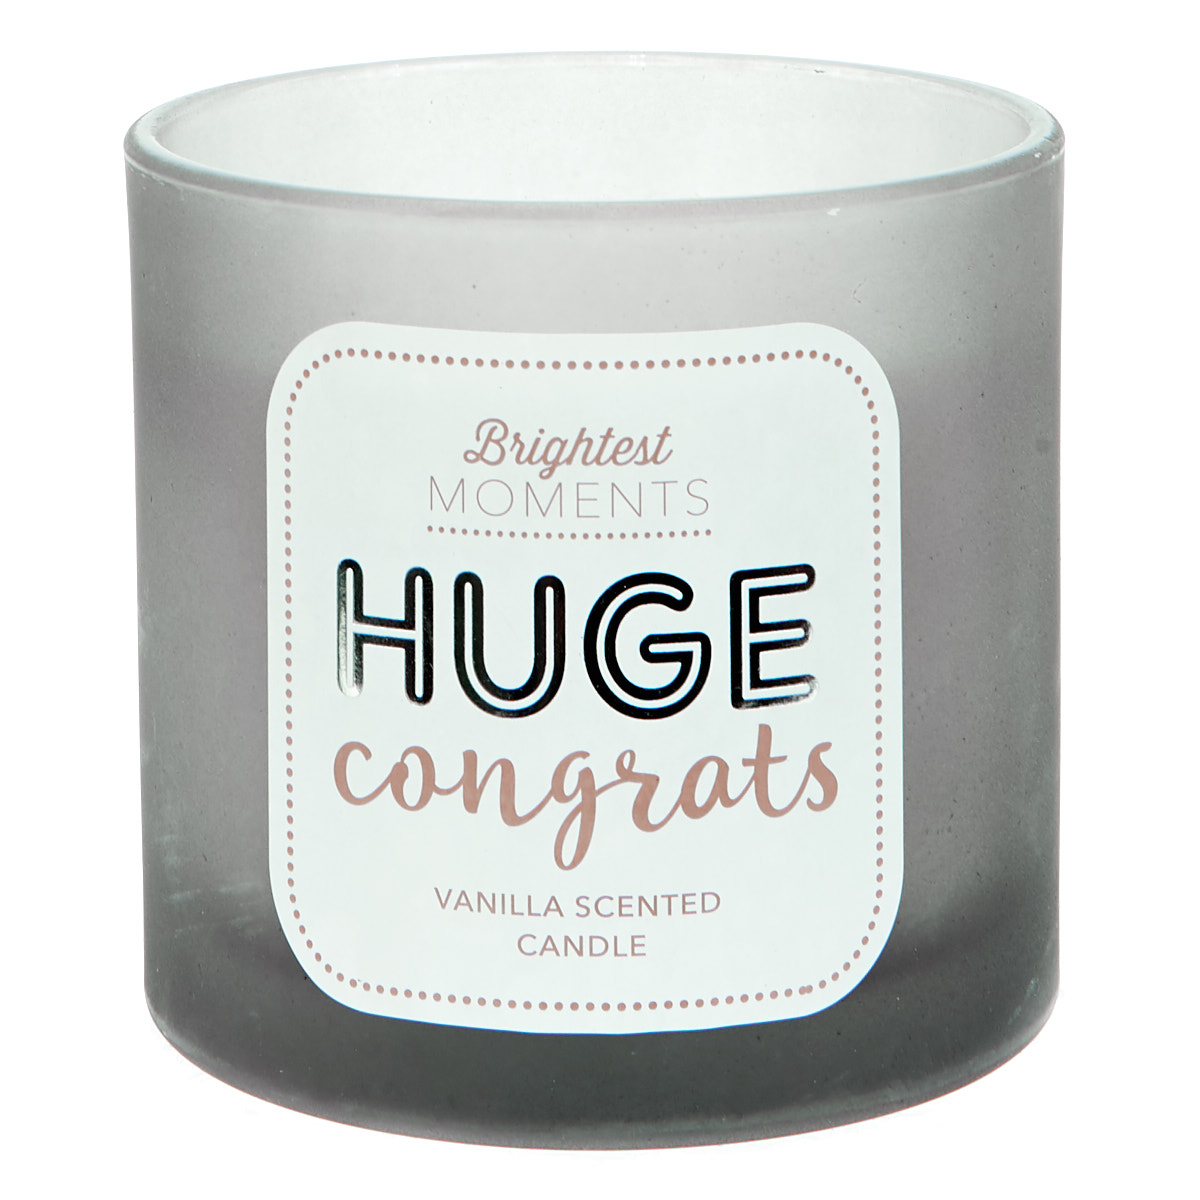 Brightest Moments Vanilla Scented Celebration Candle - Huge Congrats